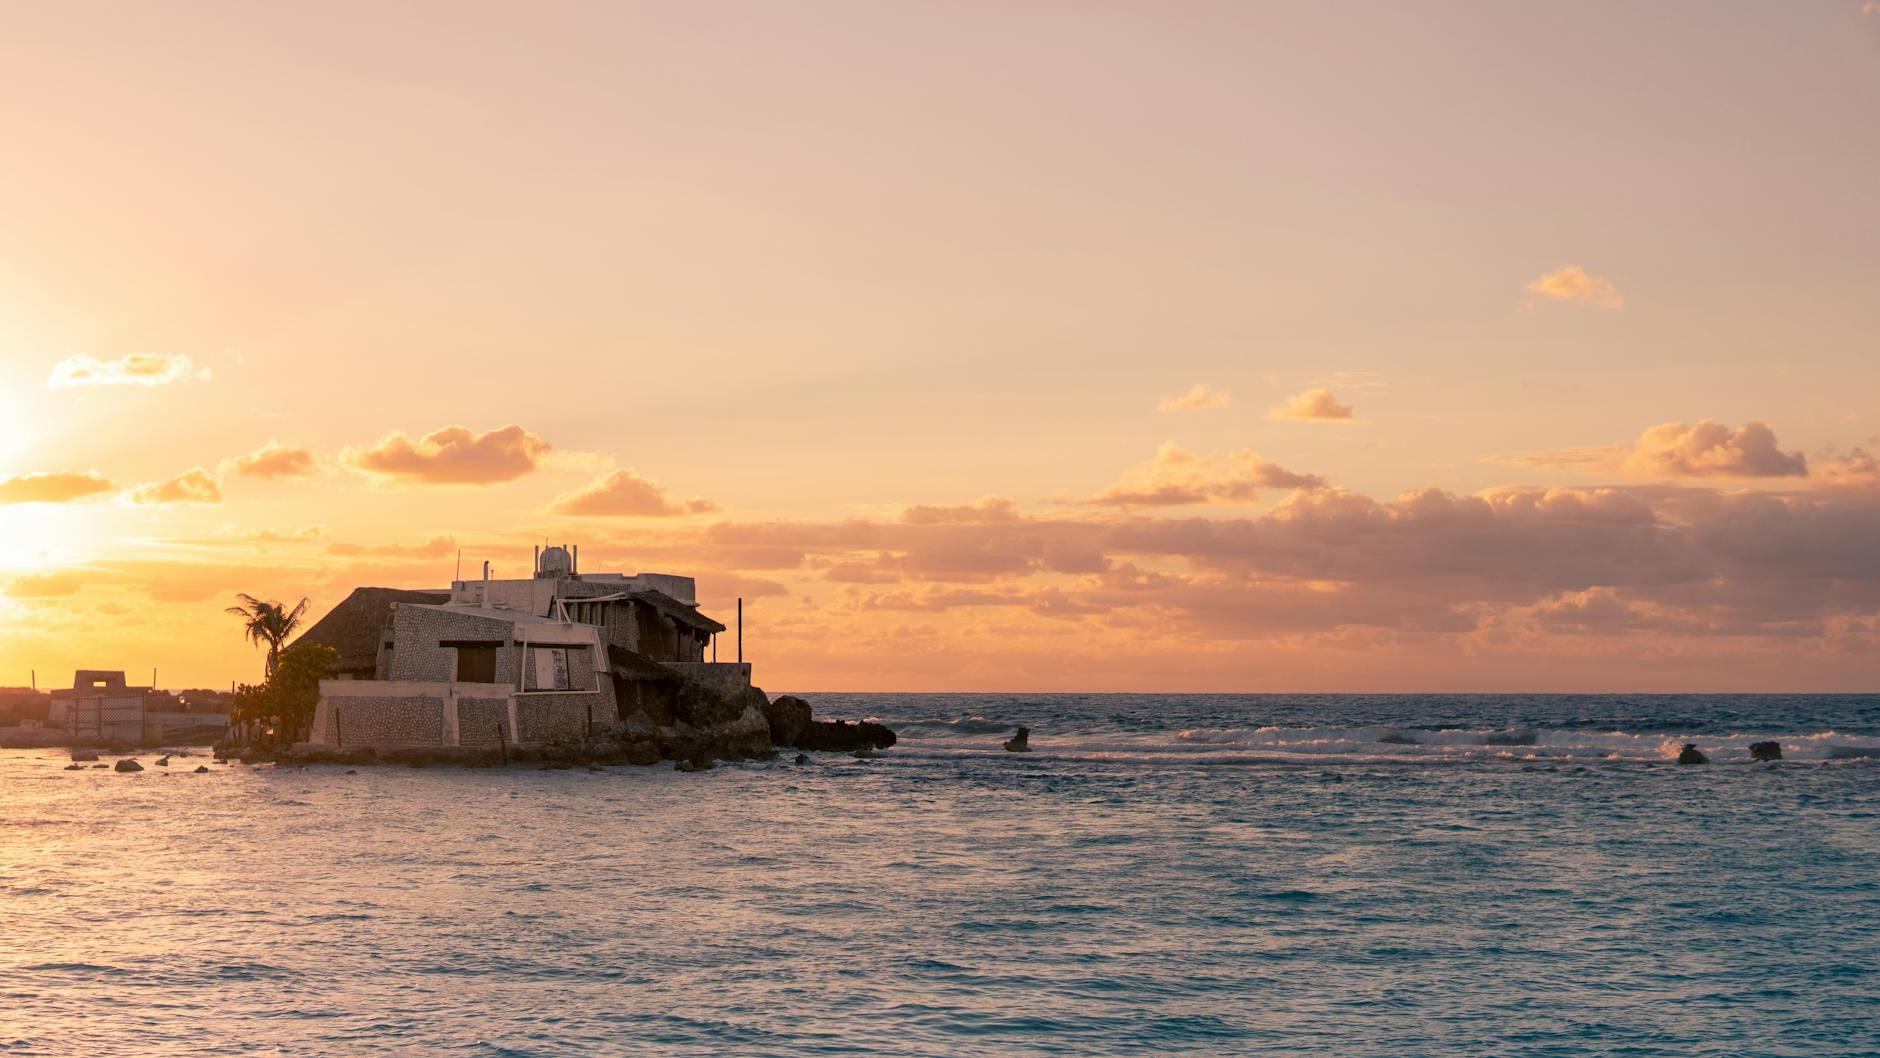 House in Isla Mujeres Bay Mexico at Sunset